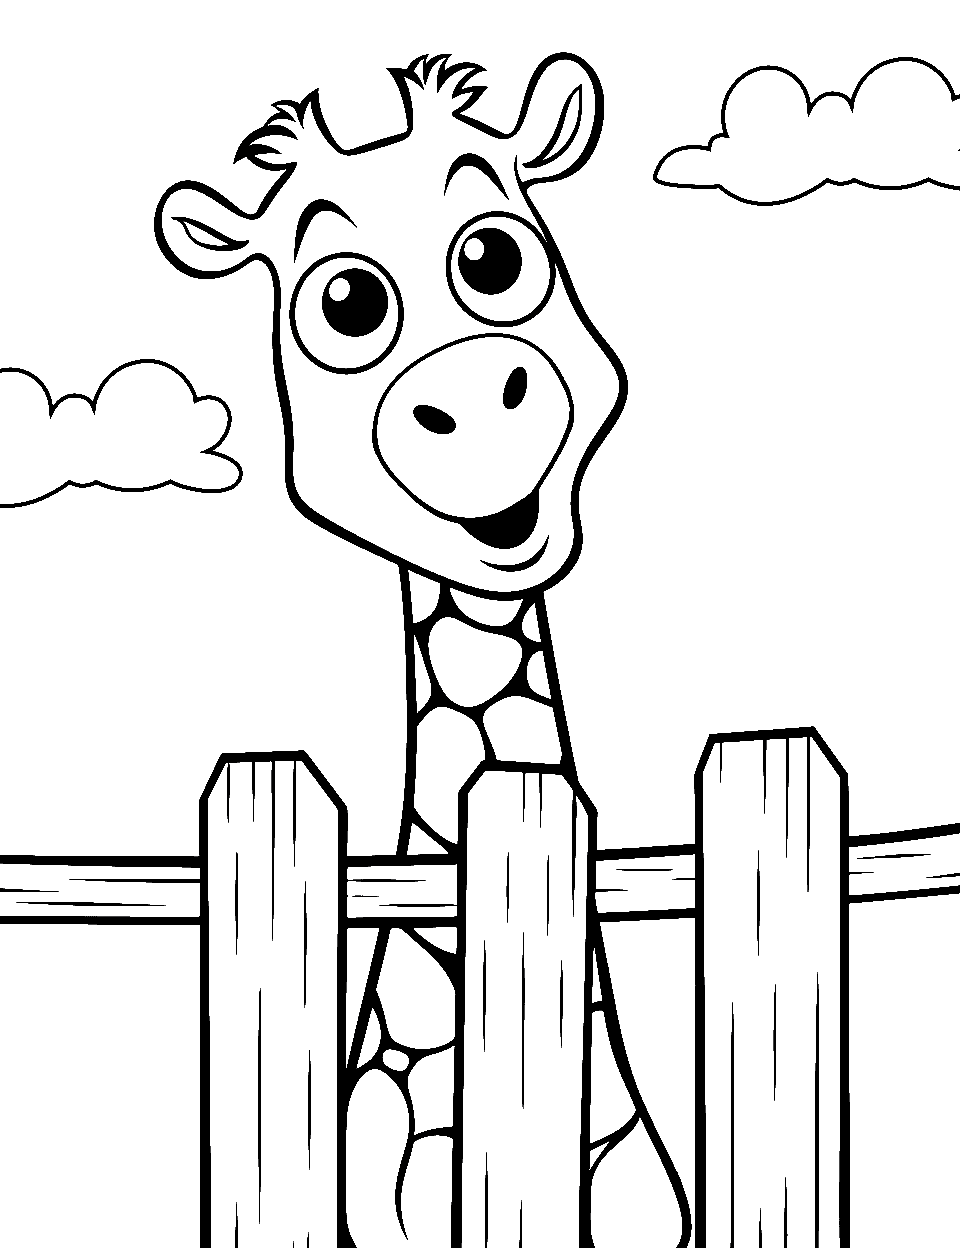 75 Preschool Coloring Pages: Free Printable Sheets